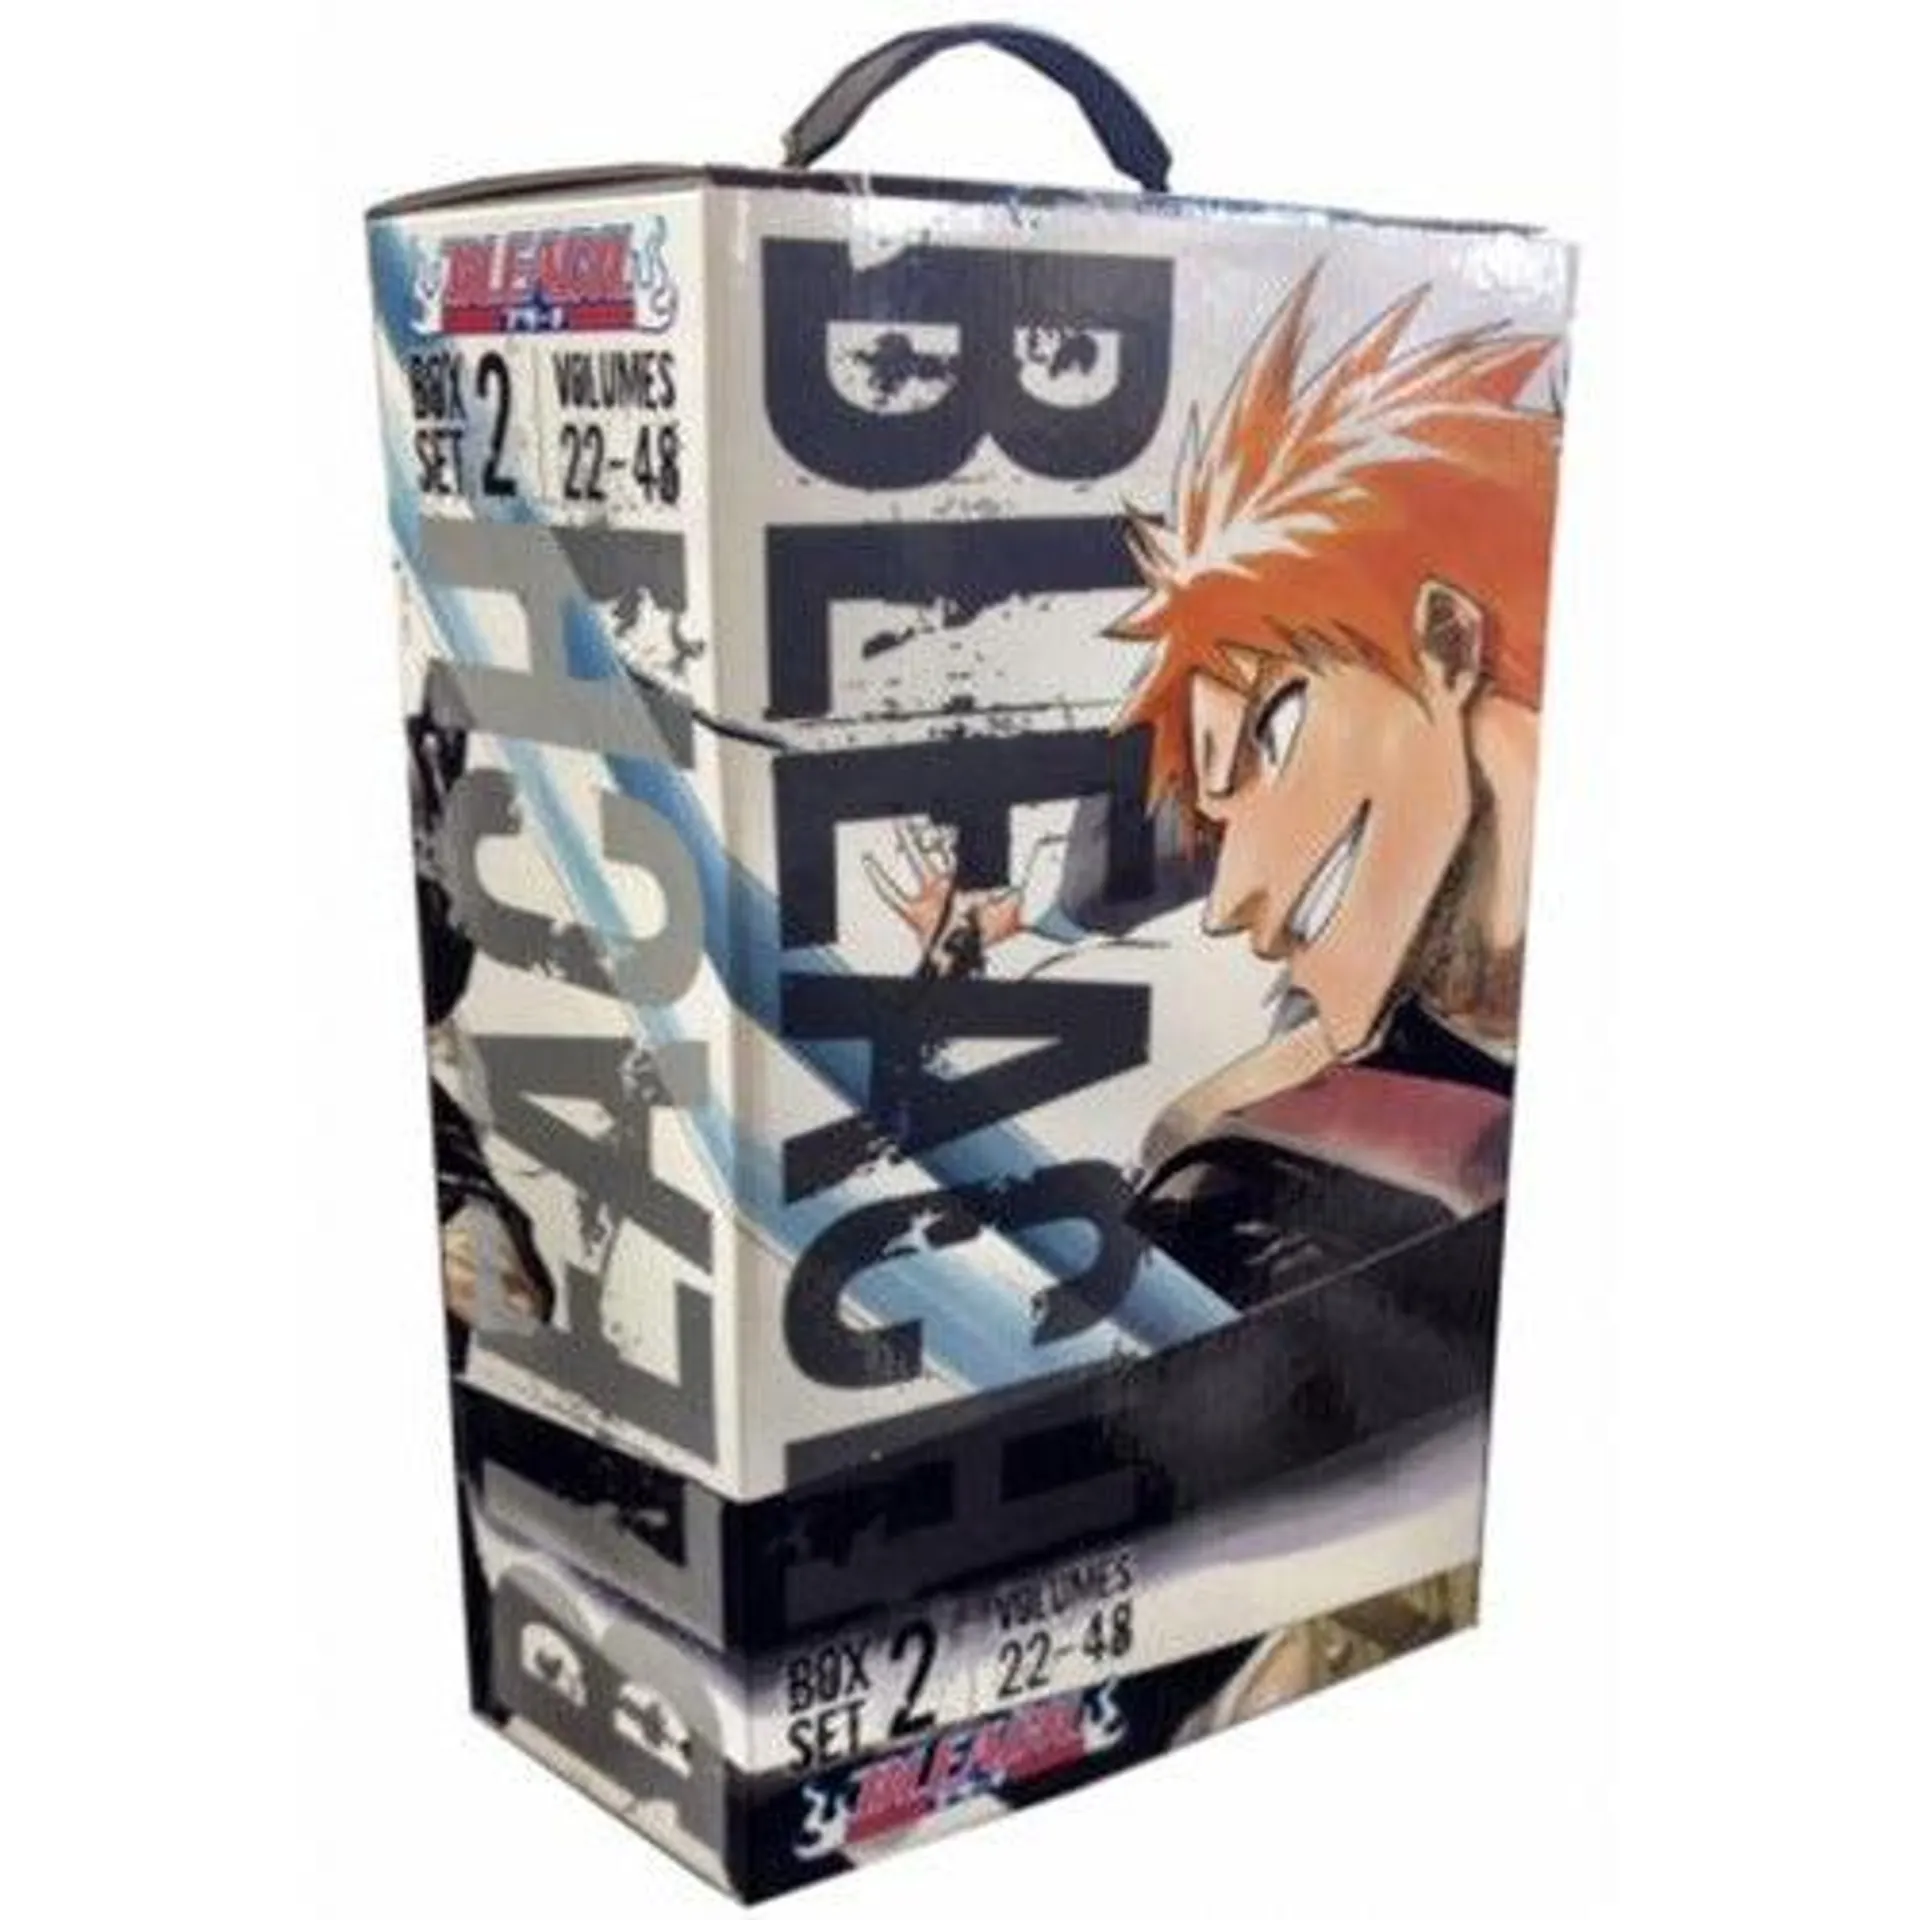 Bleach Box Set 2 Volumes 22-48 Complete Box Set Pack Collection By Tite Kubo